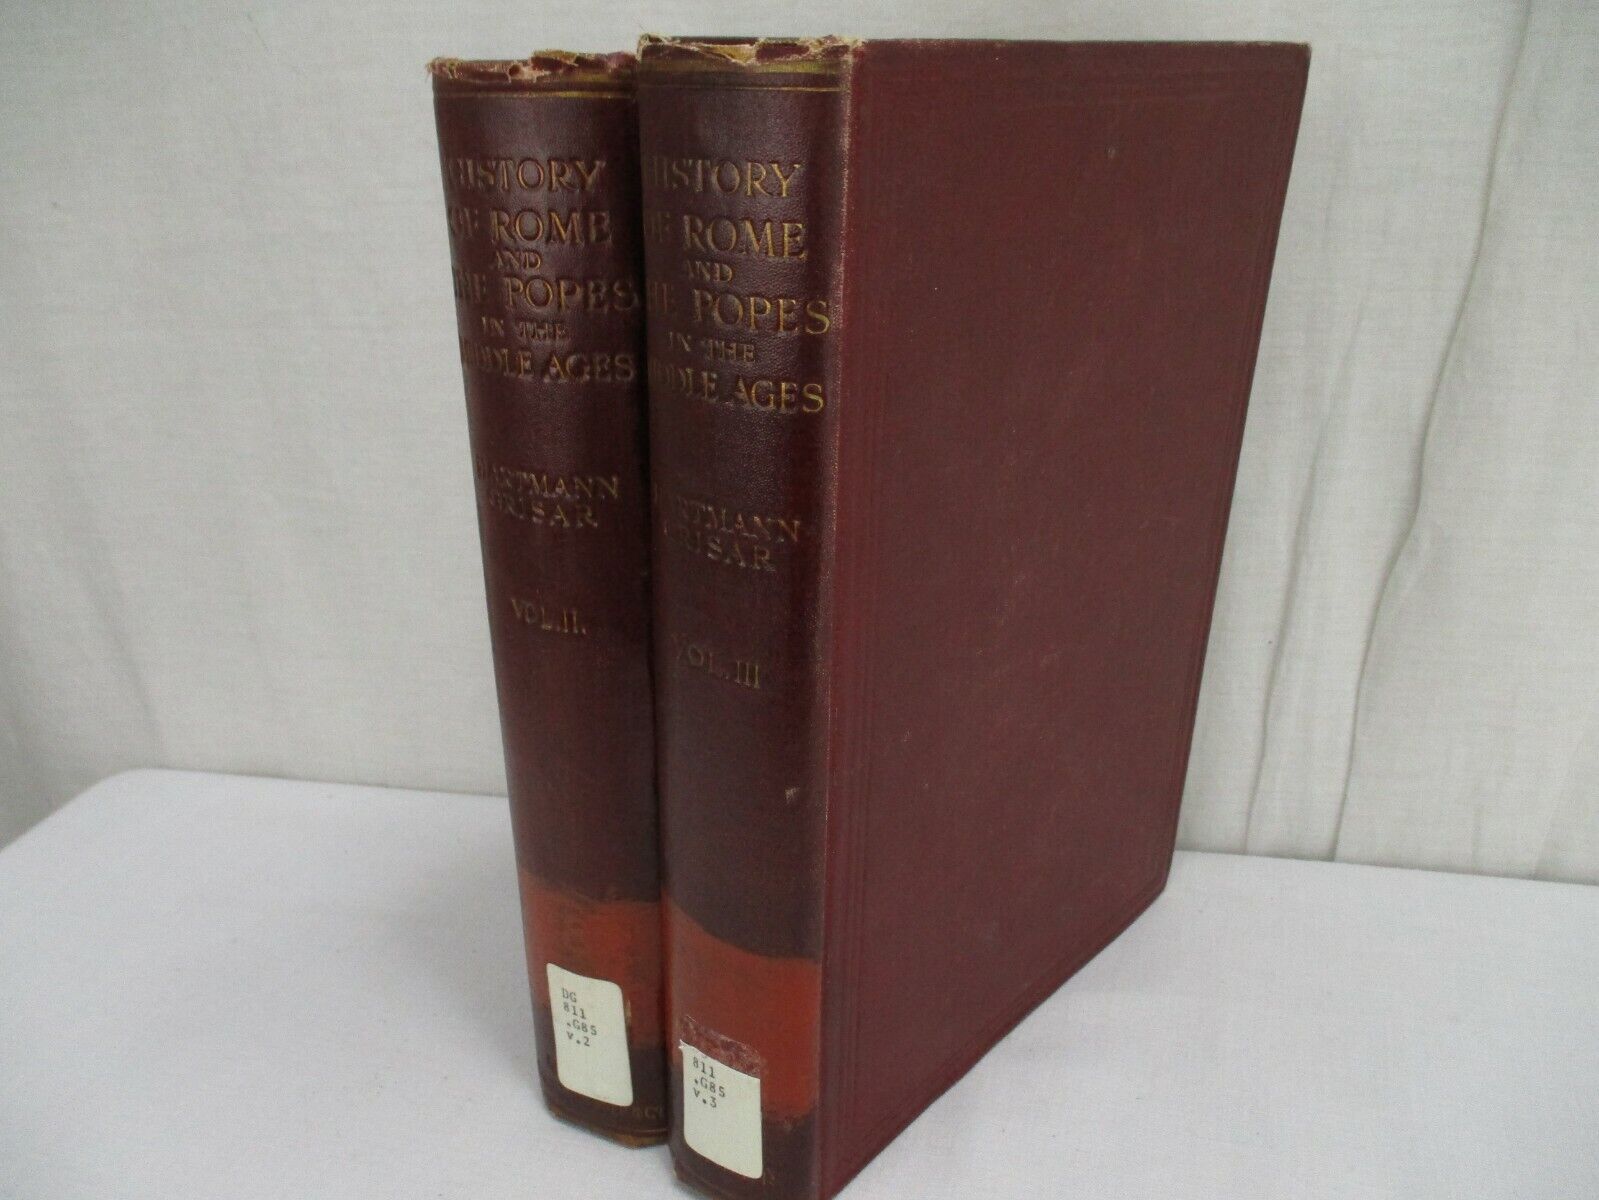 History Of Rome And The Popes In The Middle Ages Vol  2 and 3 1912 Vintage Books Без бренда